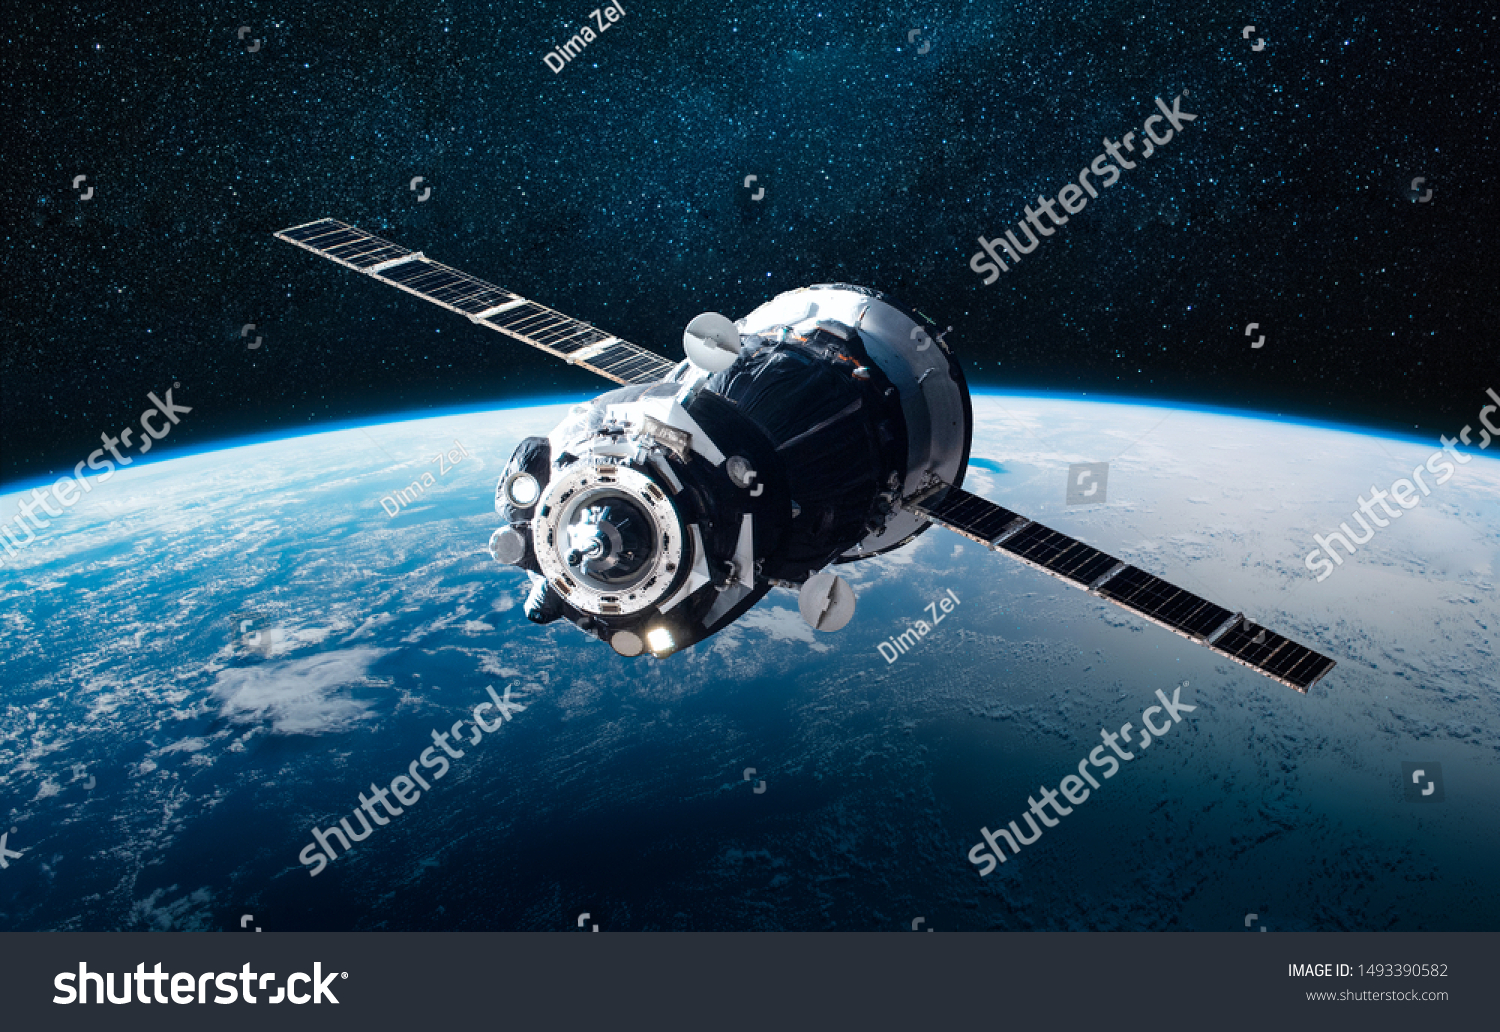 Cargo space craft and Earth planet. Dark background. Sci-fi wallpaper. Elements of this image furnished by NASA #1493390582